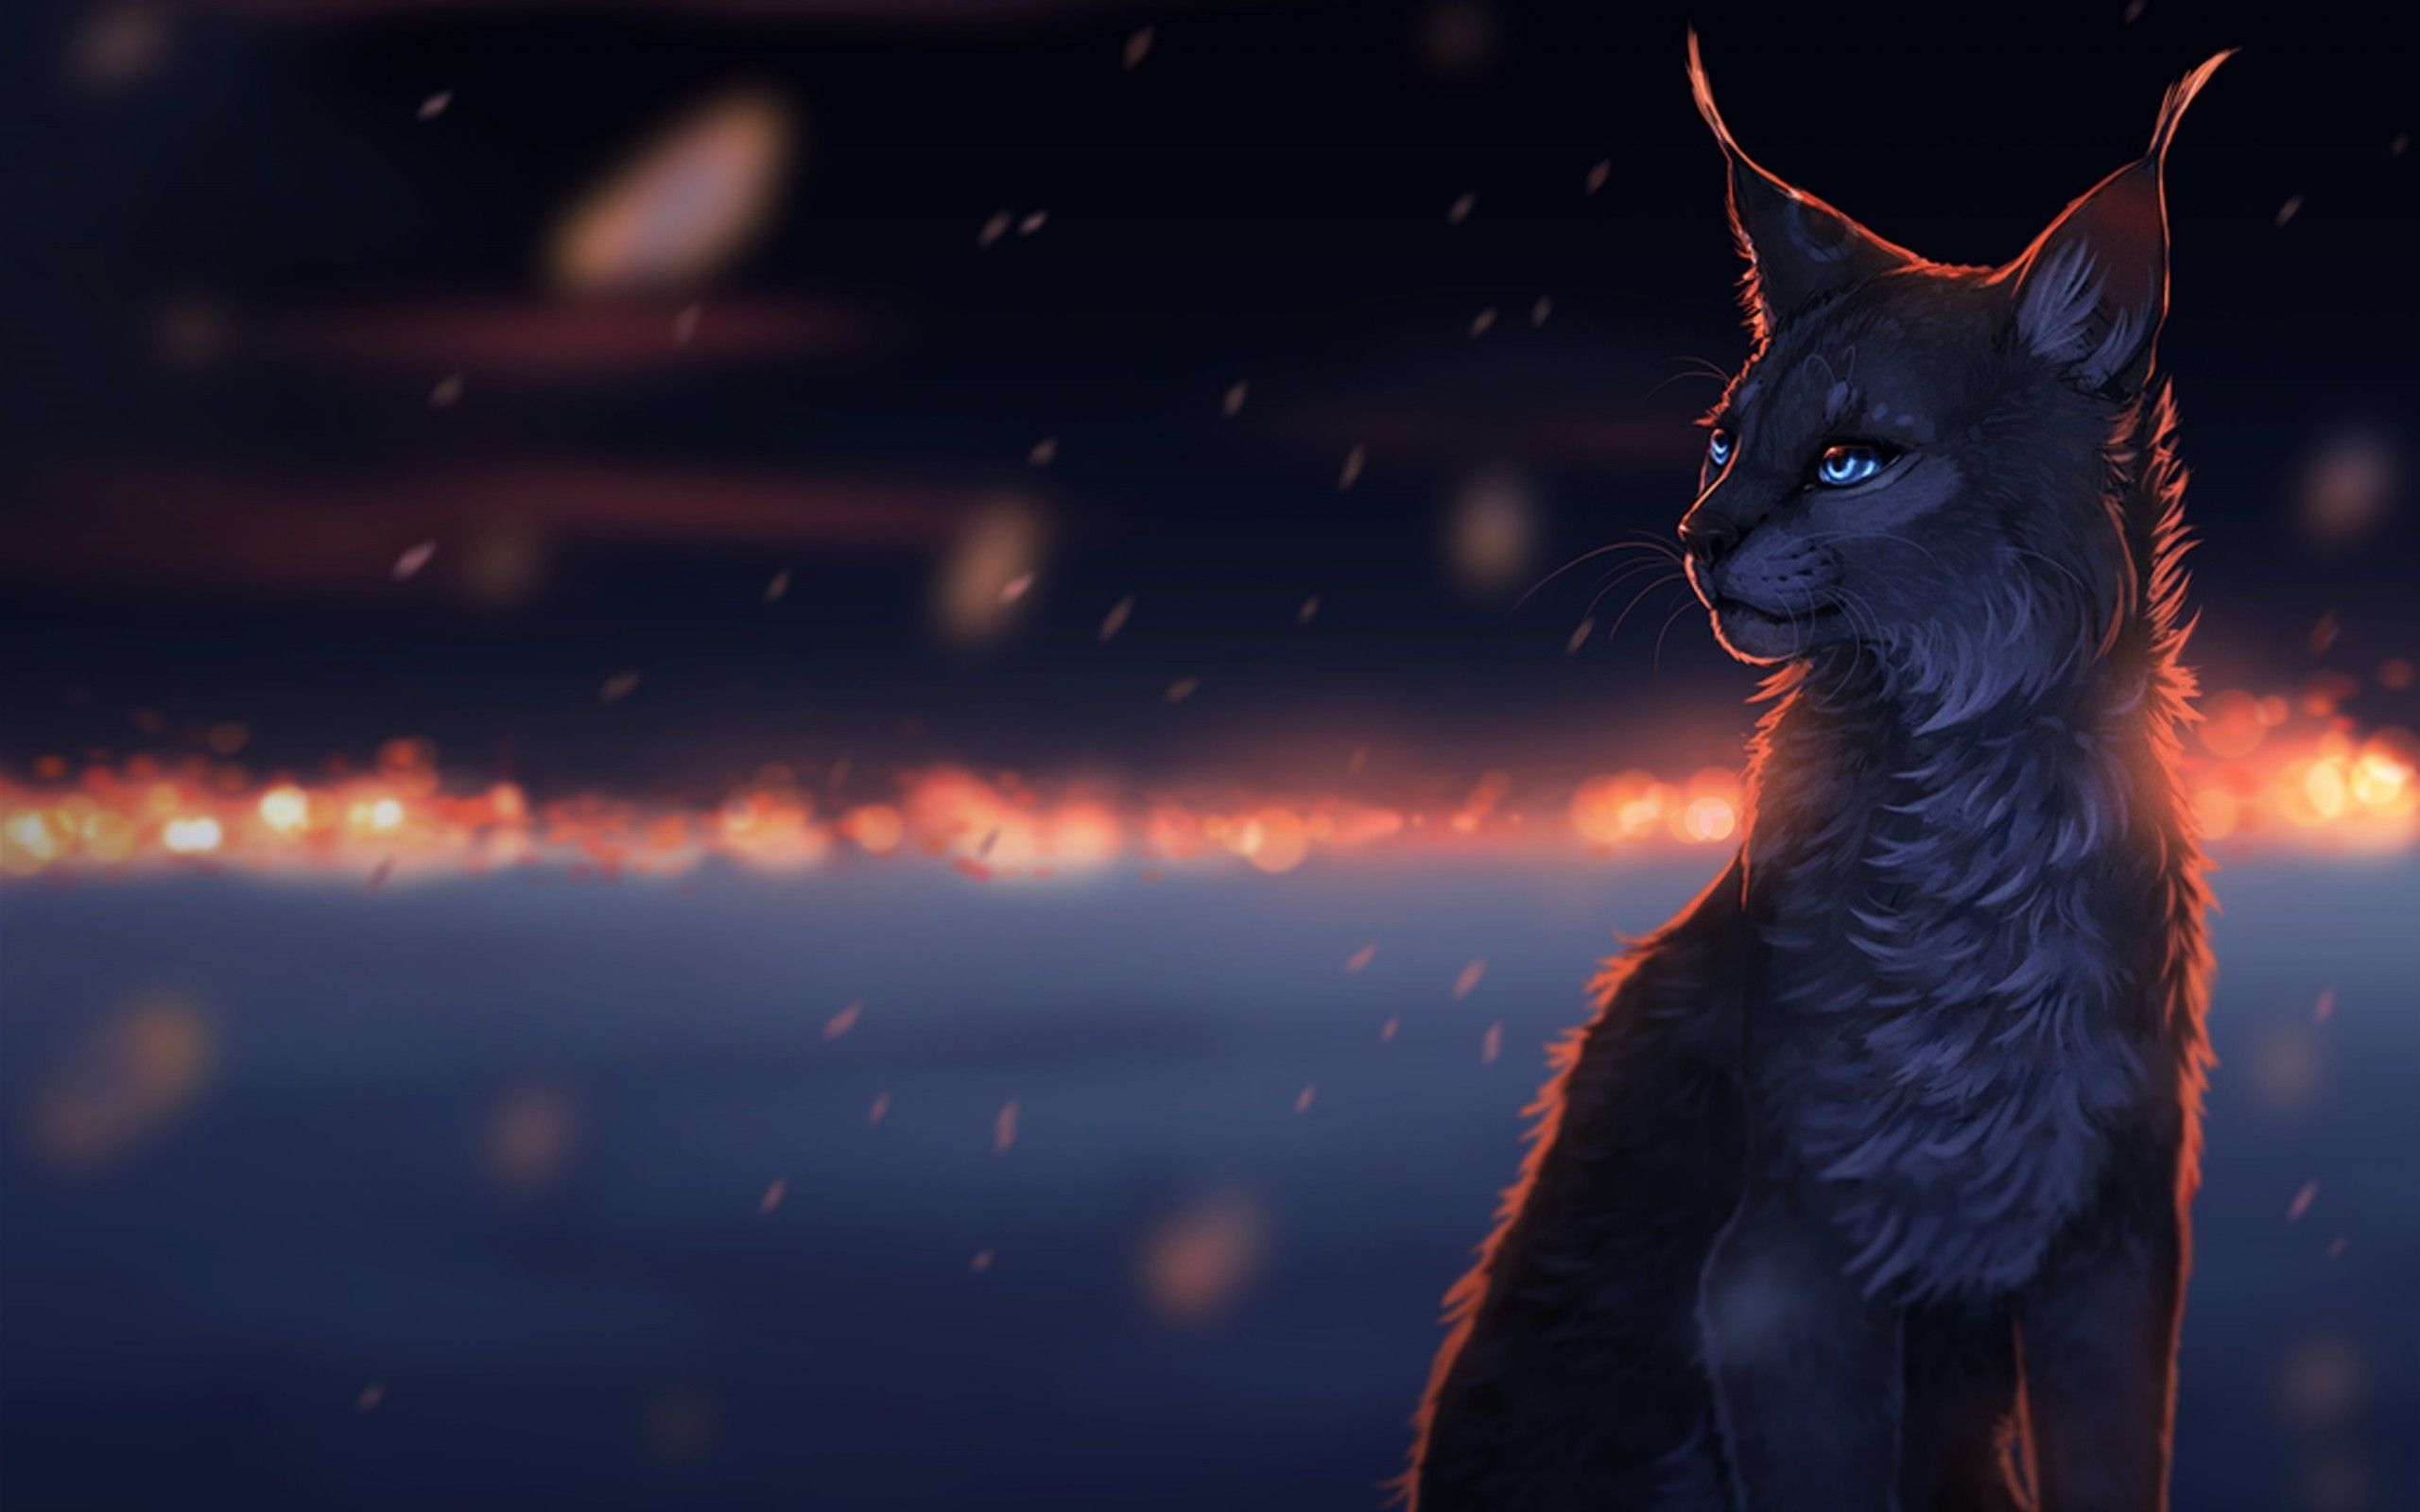 Download Warrior cats wallpaper MOD APK v2 for Android